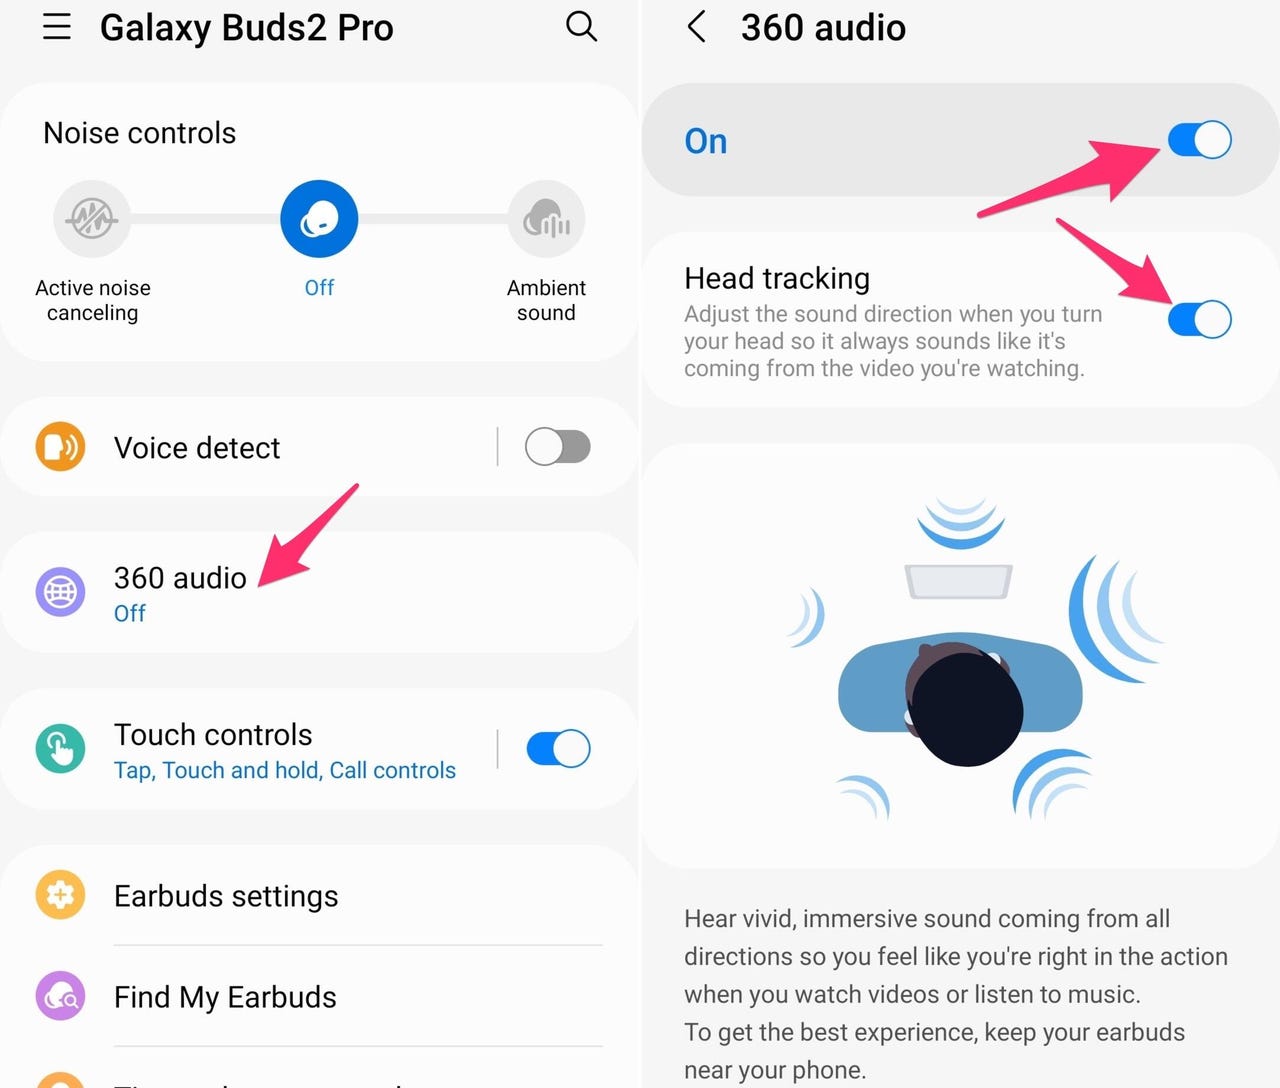 Galaxy Buds 2 add new features: 8 must-know tips for Samsung's new